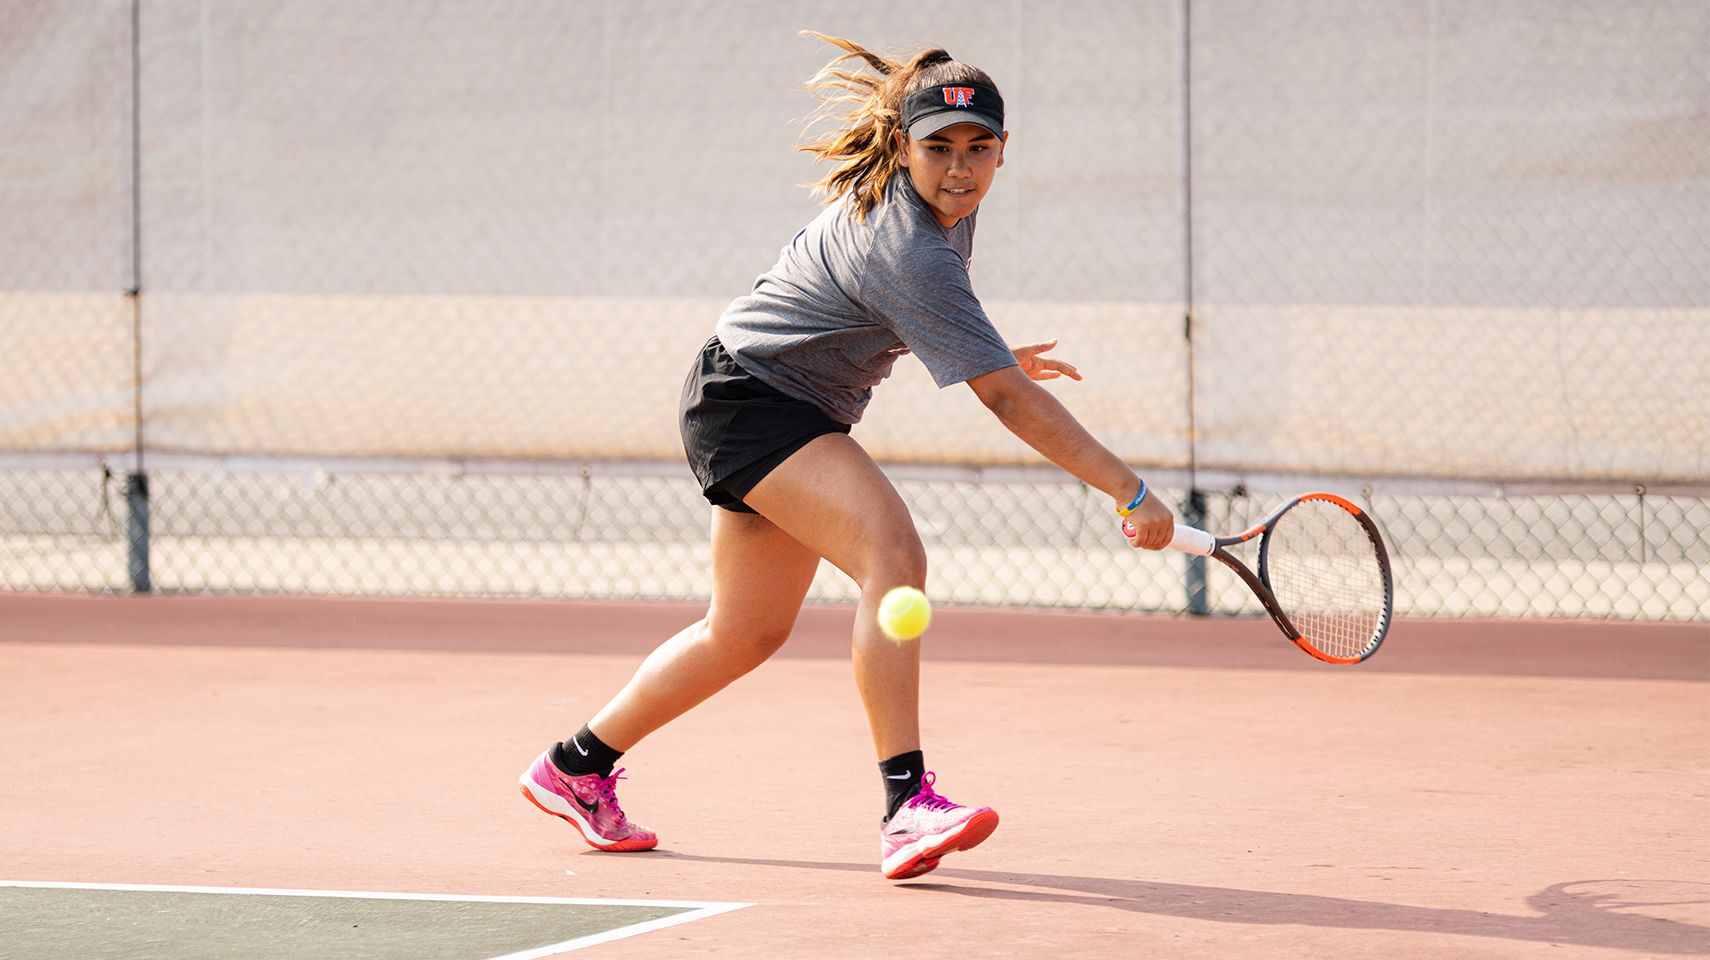 Women's tennis player hitting the ball back handed